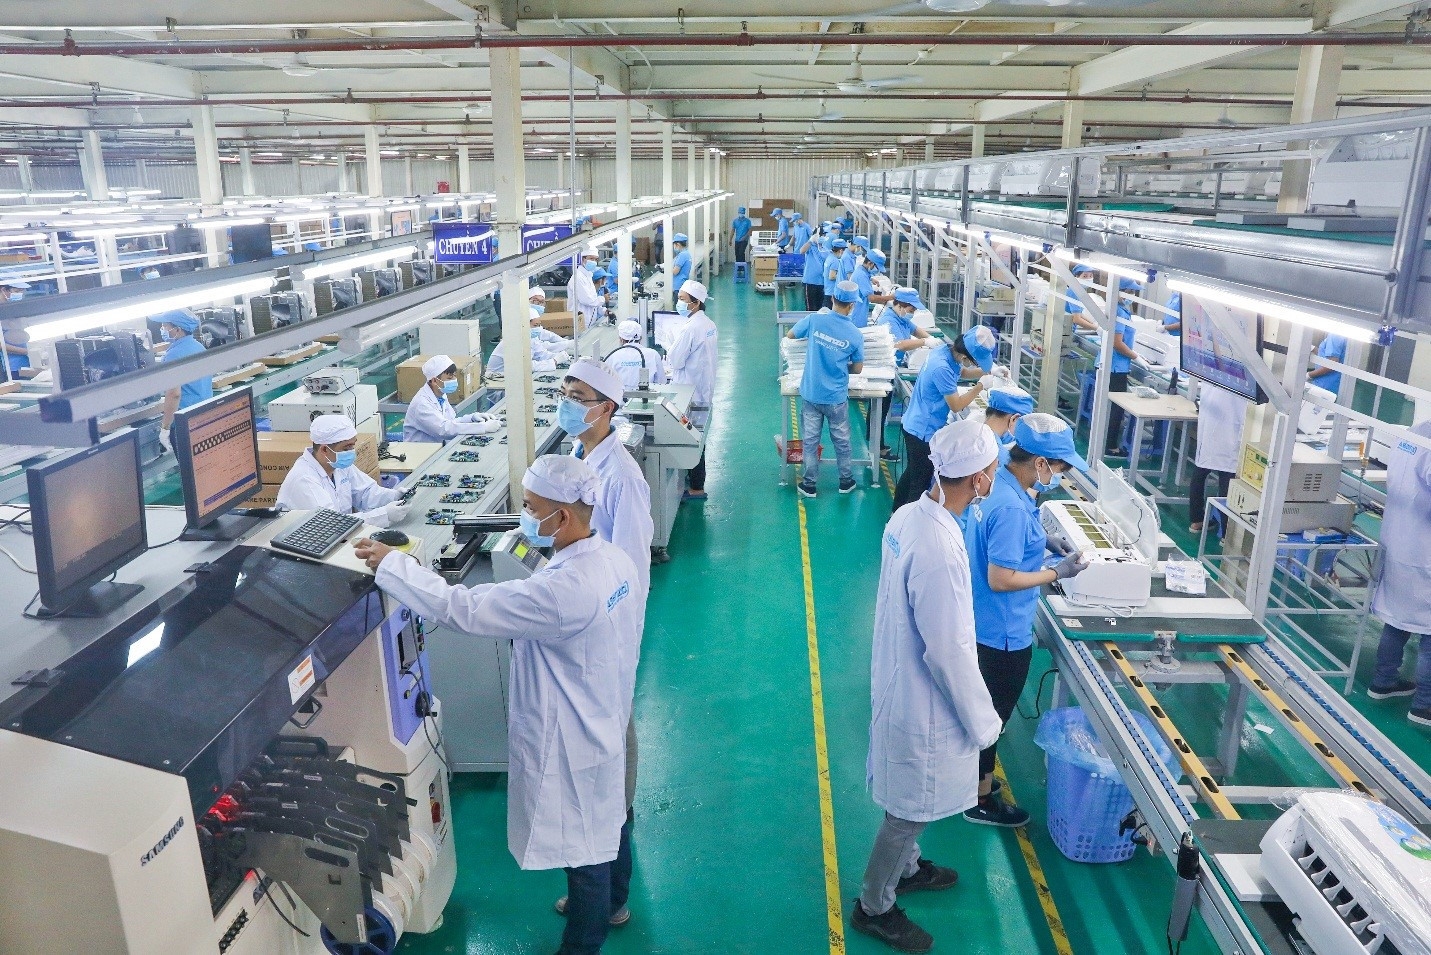 vietnams manufacturing activity improved in may